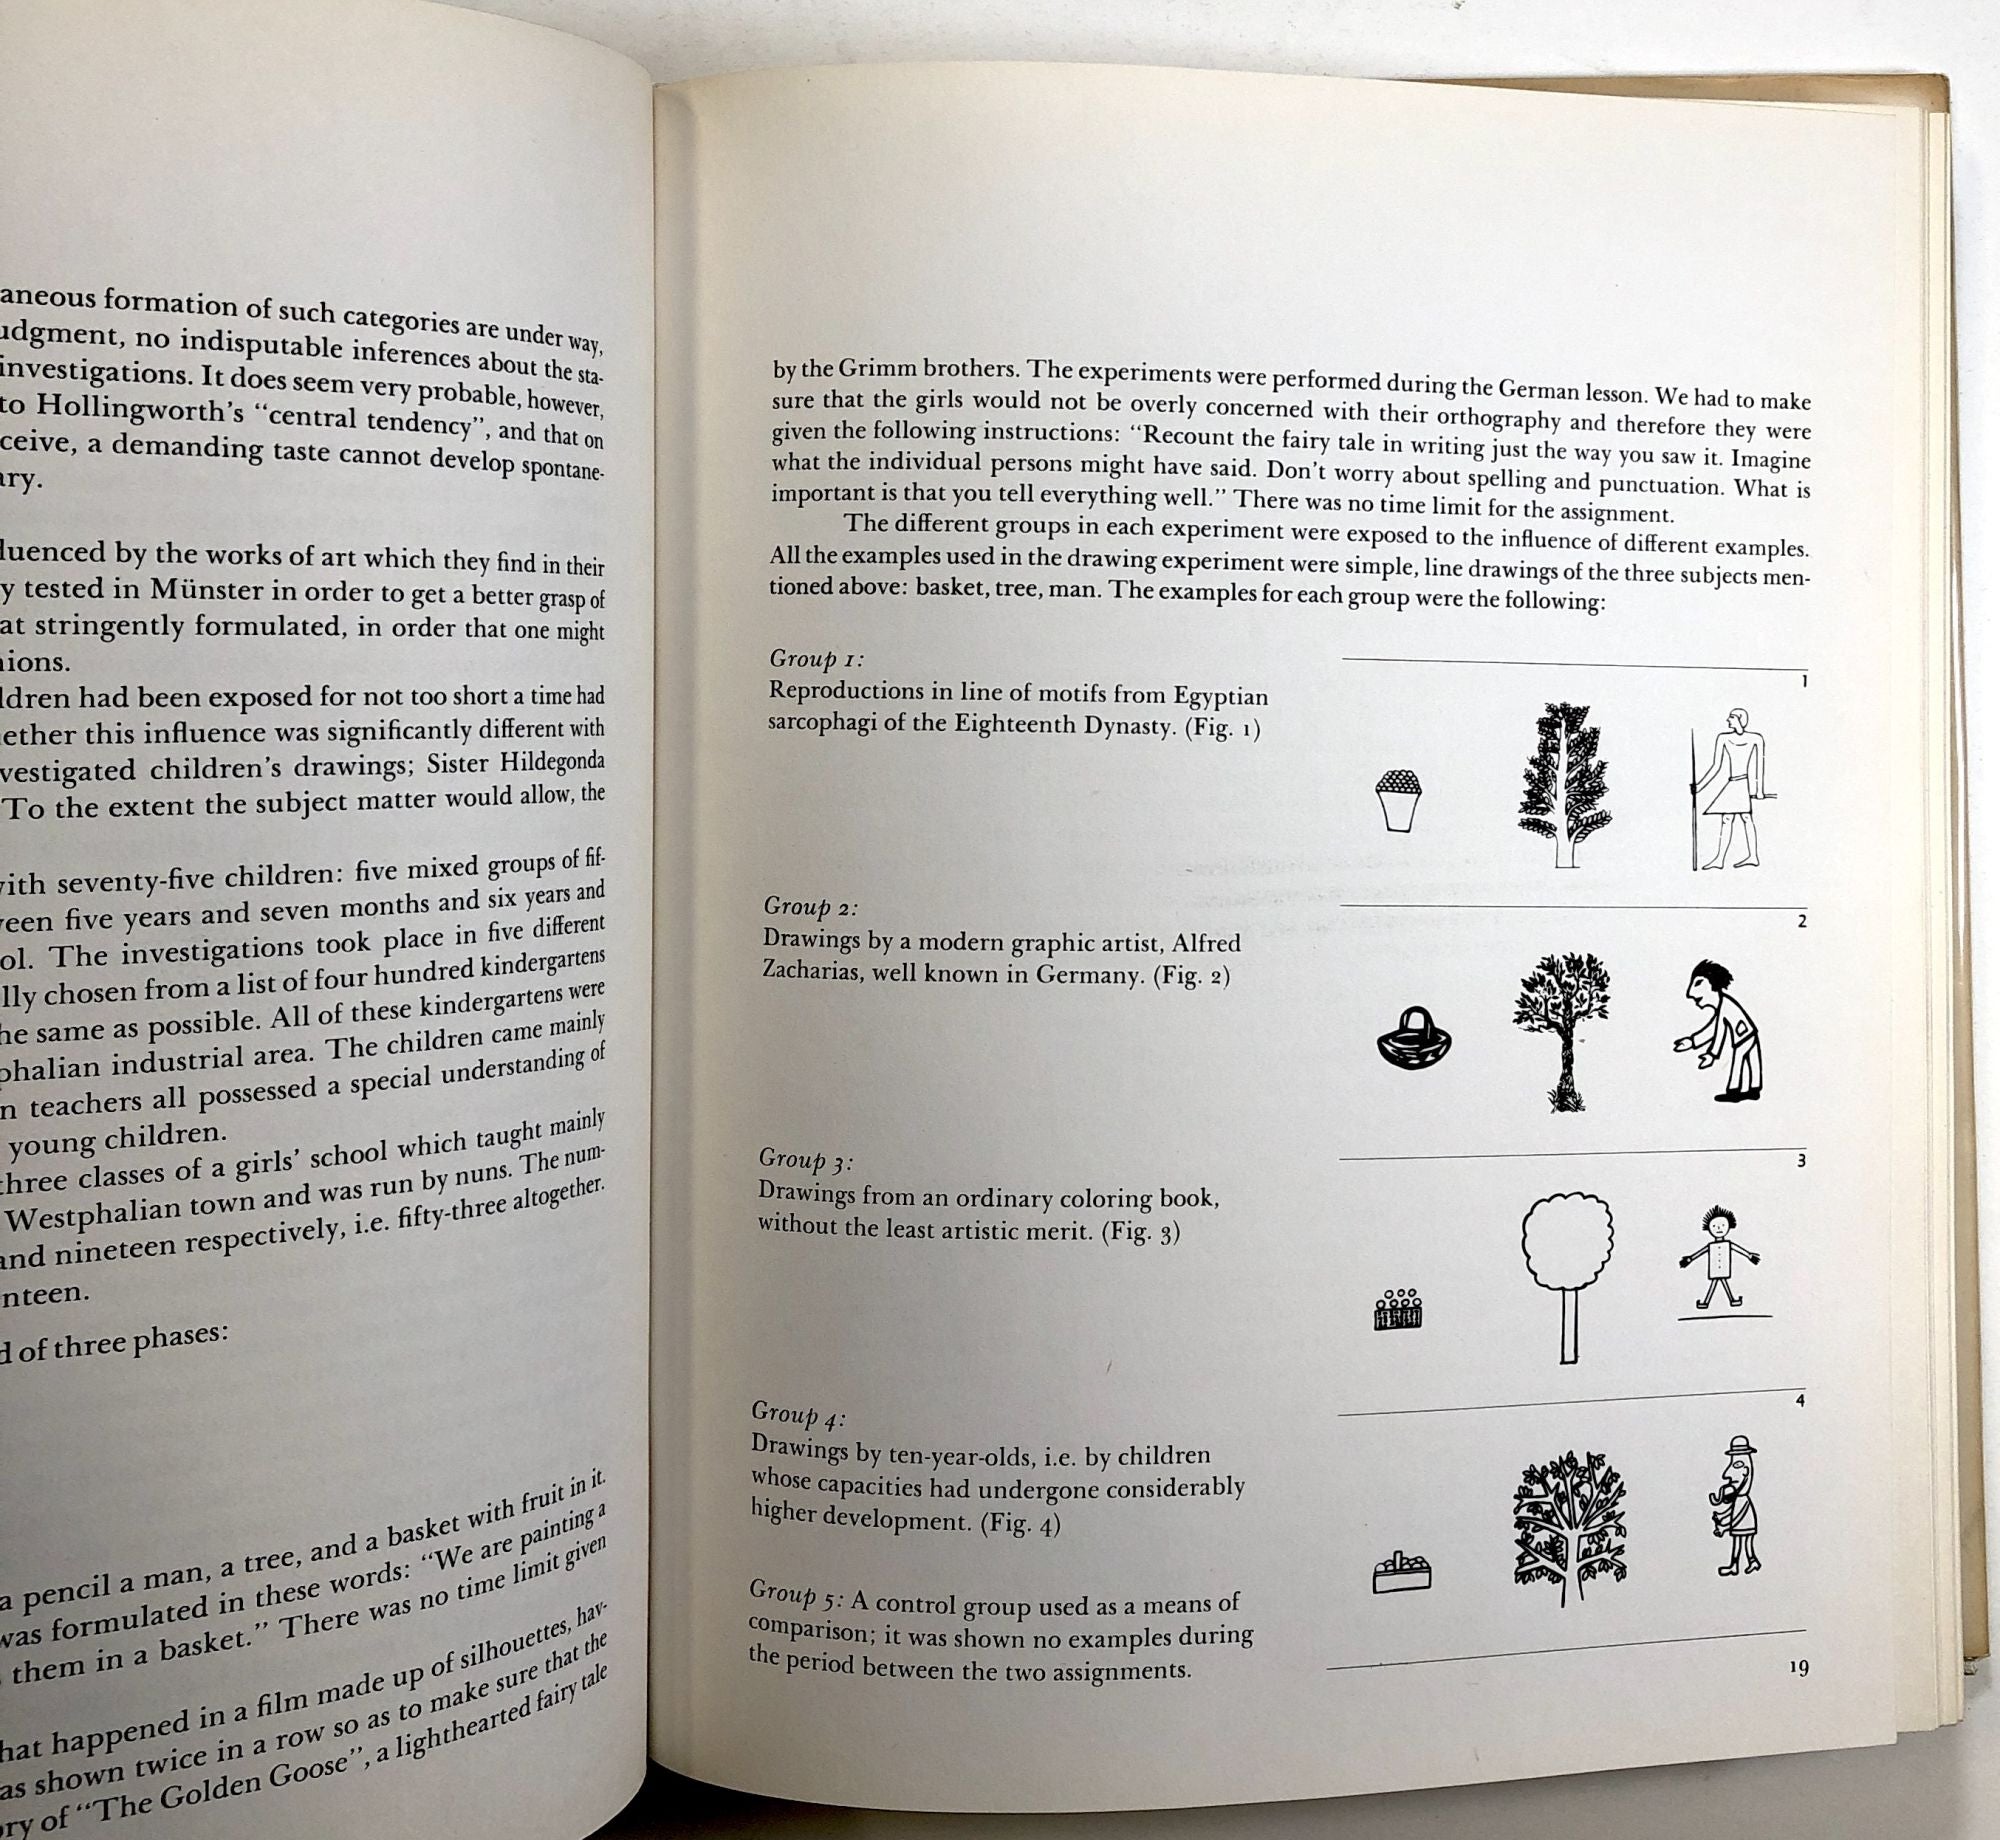 Education of Vision; Vision + Value Series by Gyorgy Kepes, ed., Rudolf  Arnheim, Wolfgang Metzger, Et on Common Crow Books